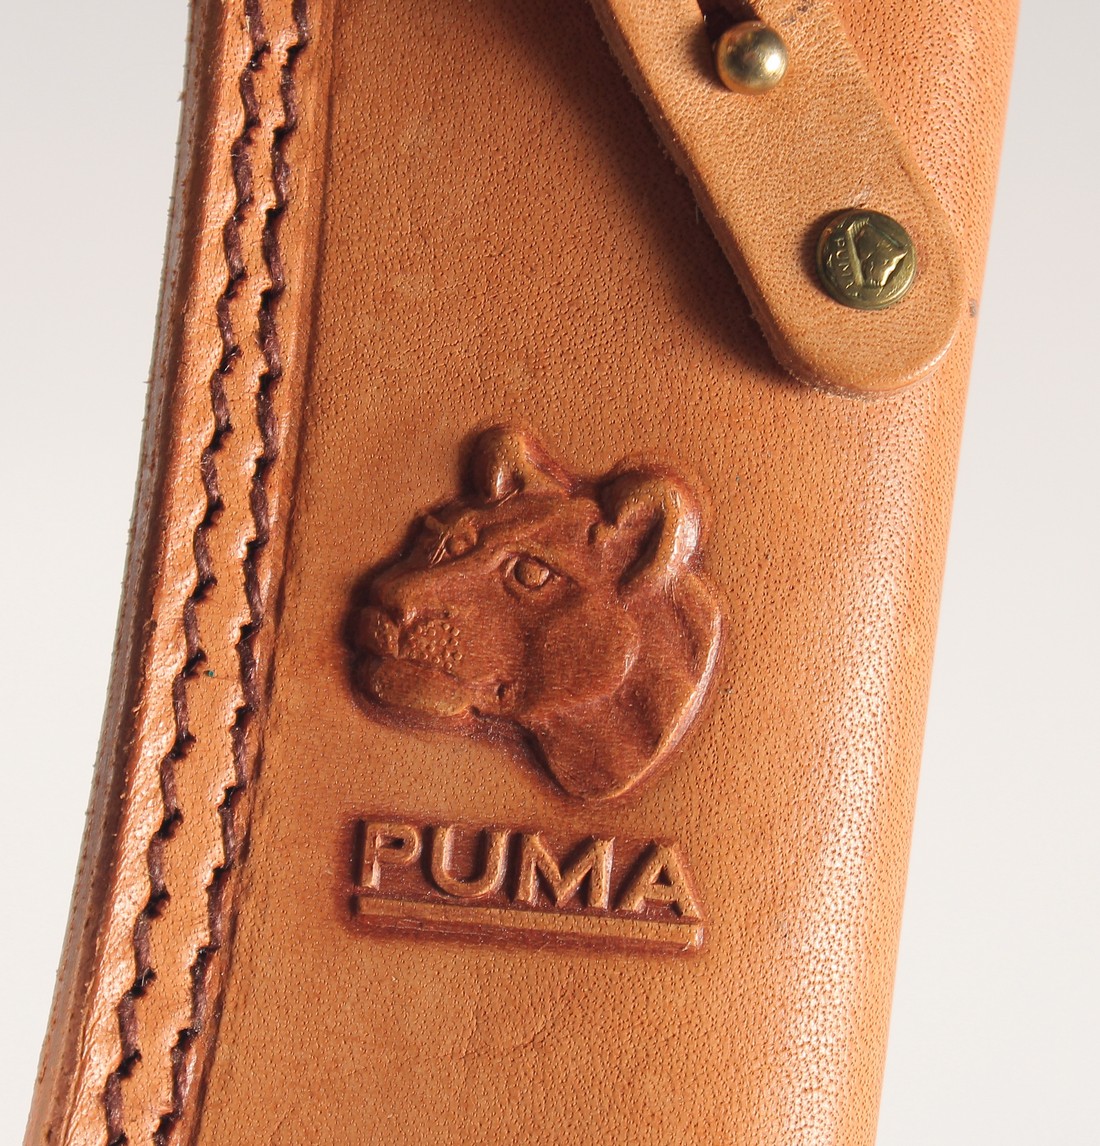 A PUMA WHITE HUNTER KNIFE 6377, with antler handle in a leather sheath, 10" long. - Image 6 of 7